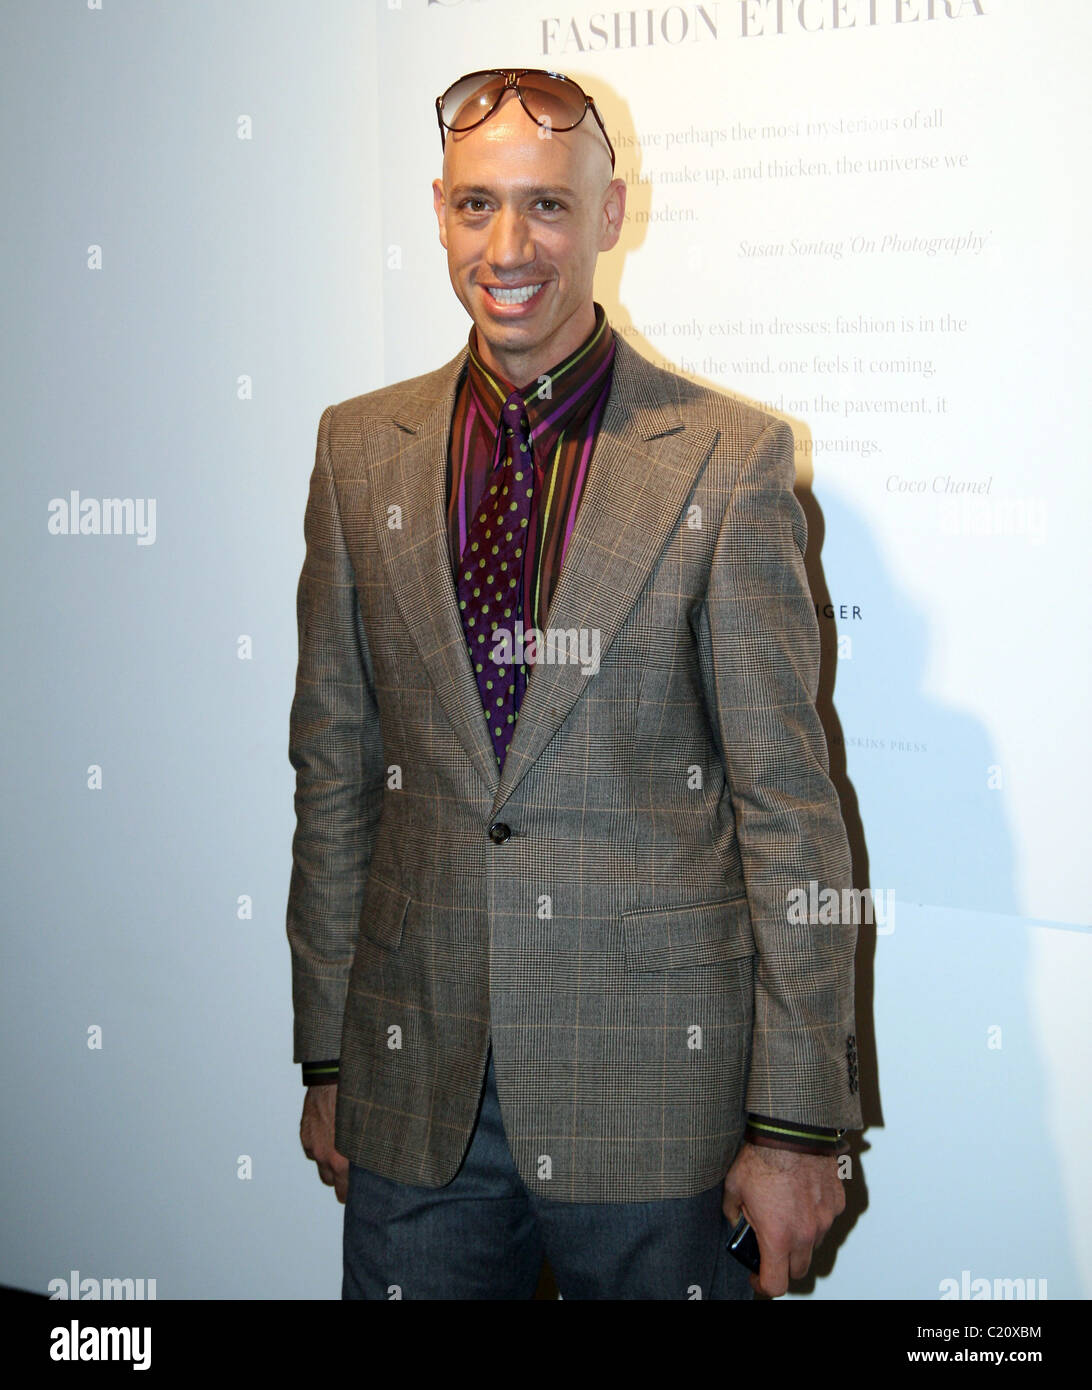 Robert Verdi Launch of book project Fashion Etcetera by Sam Haskins hosted by Tommy Hilfiger at The Milk Gallery New York City, Stock Photo